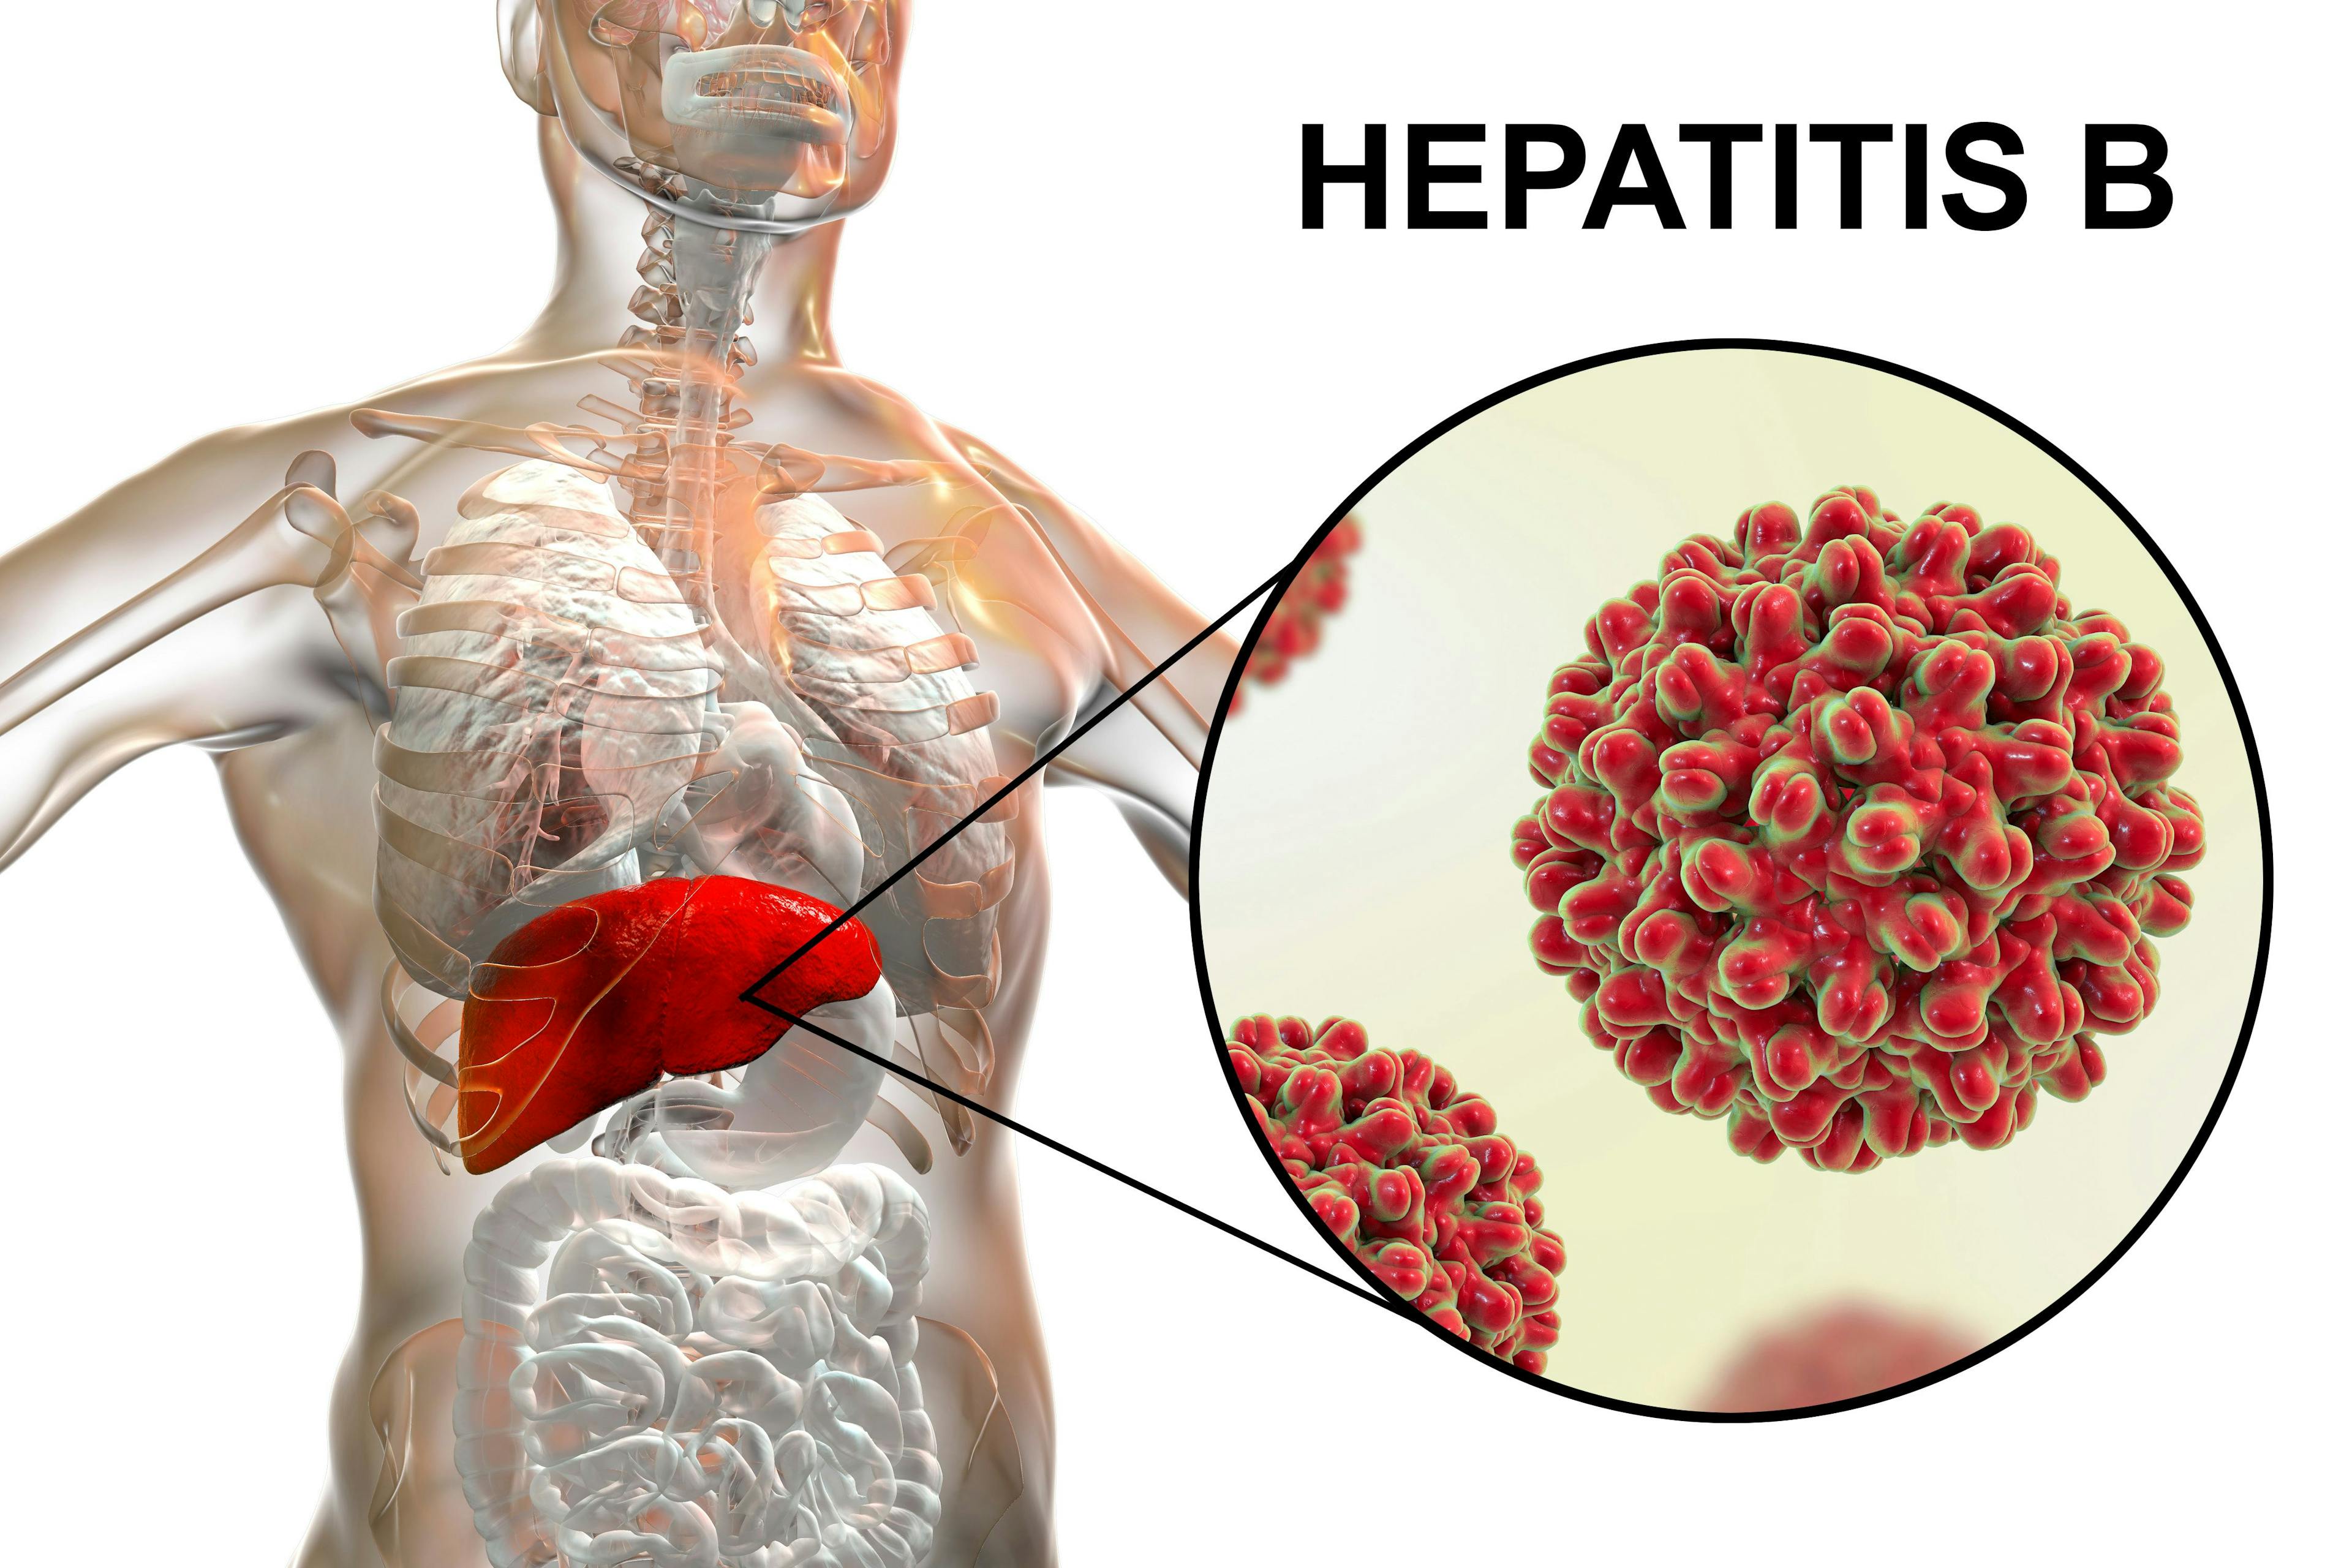 medical image. of liver and hep B virus | Dr_Microbe